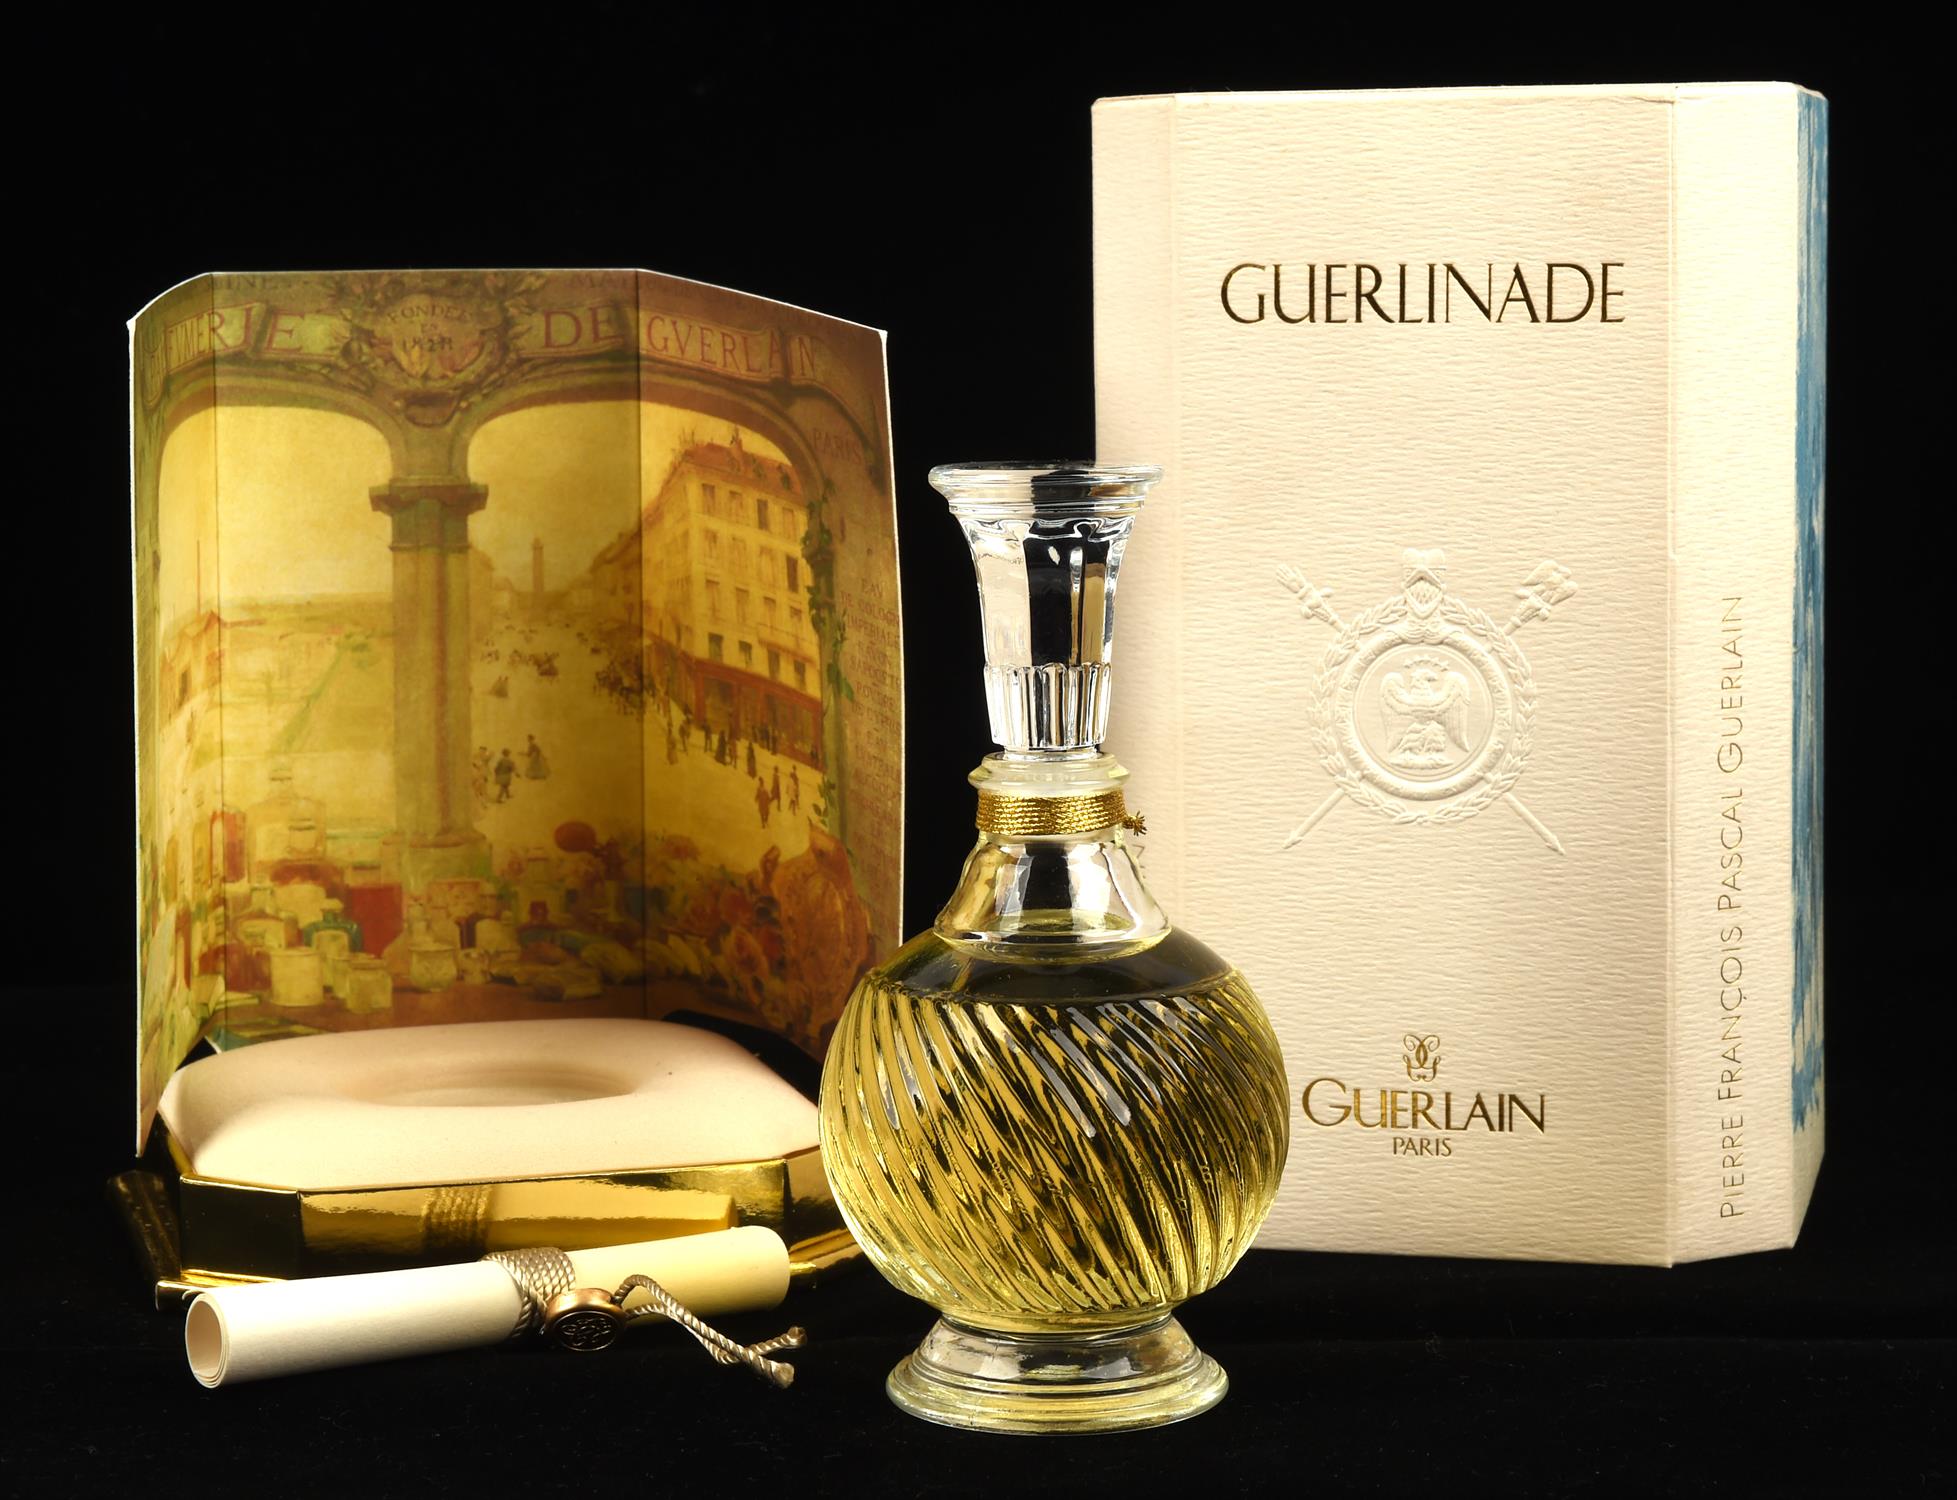 GUERLAIN GUERLINADE rare 1998 boxed re-issued renovation 1921 perfume bottled in a baccarat flacon - Image 2 of 3